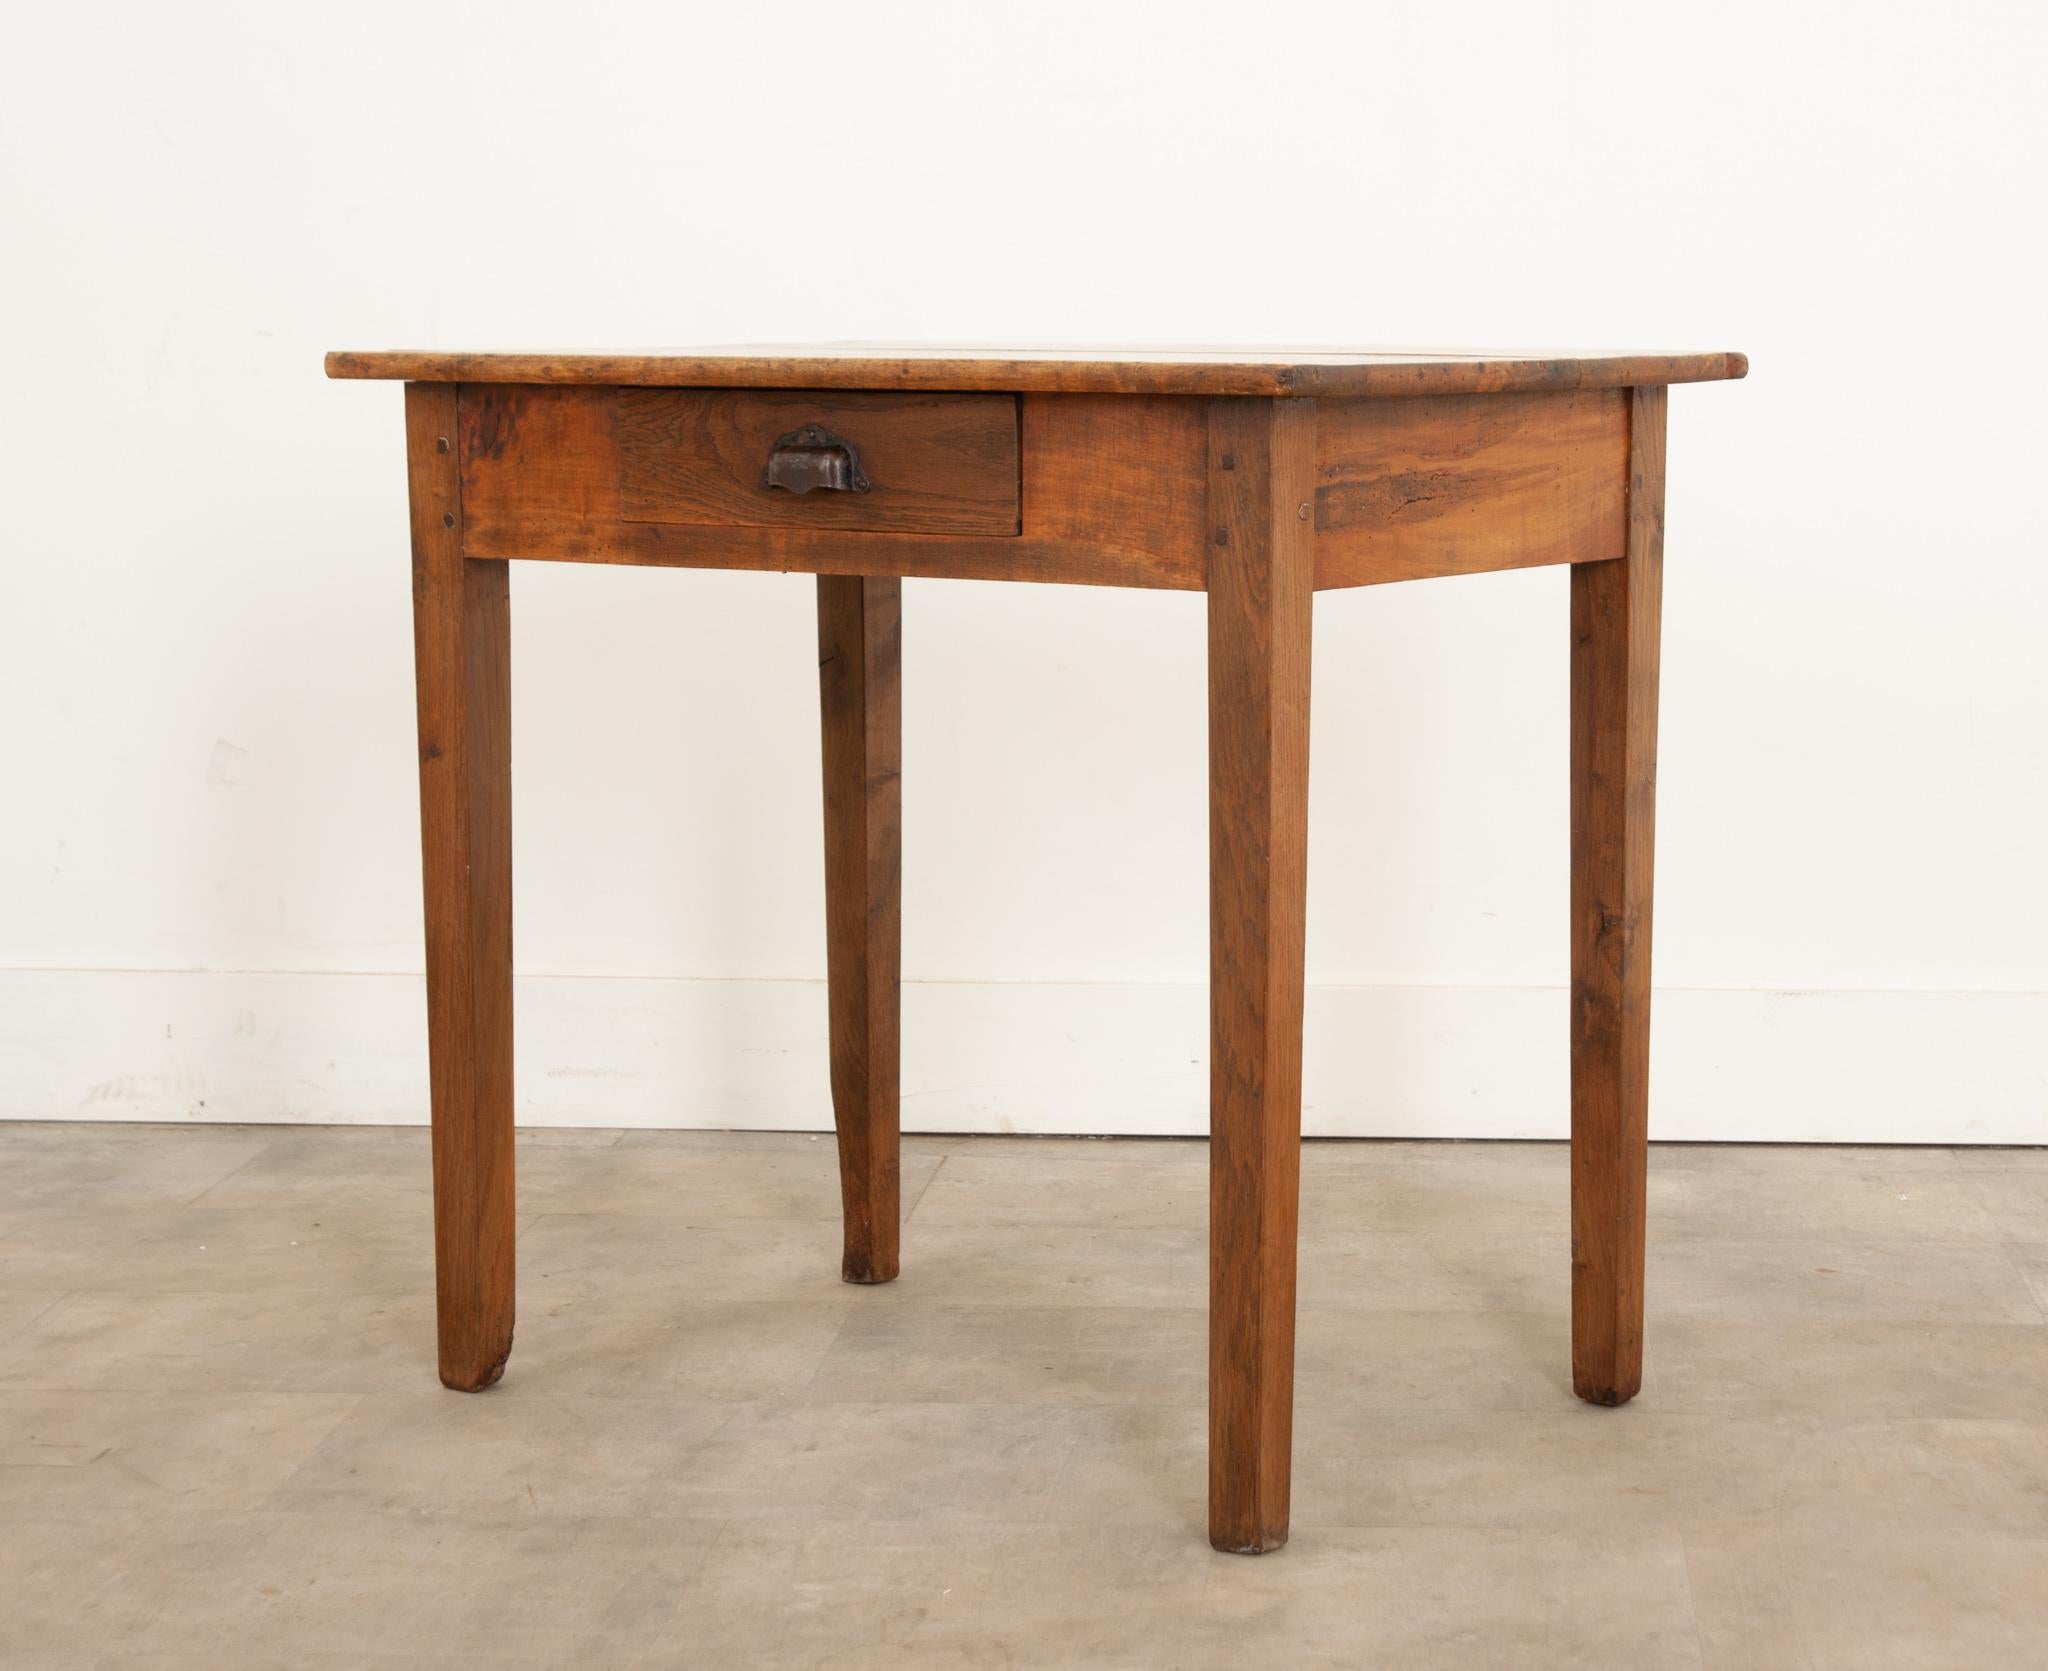 Crafted in France during the 1880s, this rustic little table is made of solid poplar. Its wonderfully patinated hardwood apron has a single drawer effaced with its original, shaped metal bin pull. The apron connects to square, slightly tapered legs.